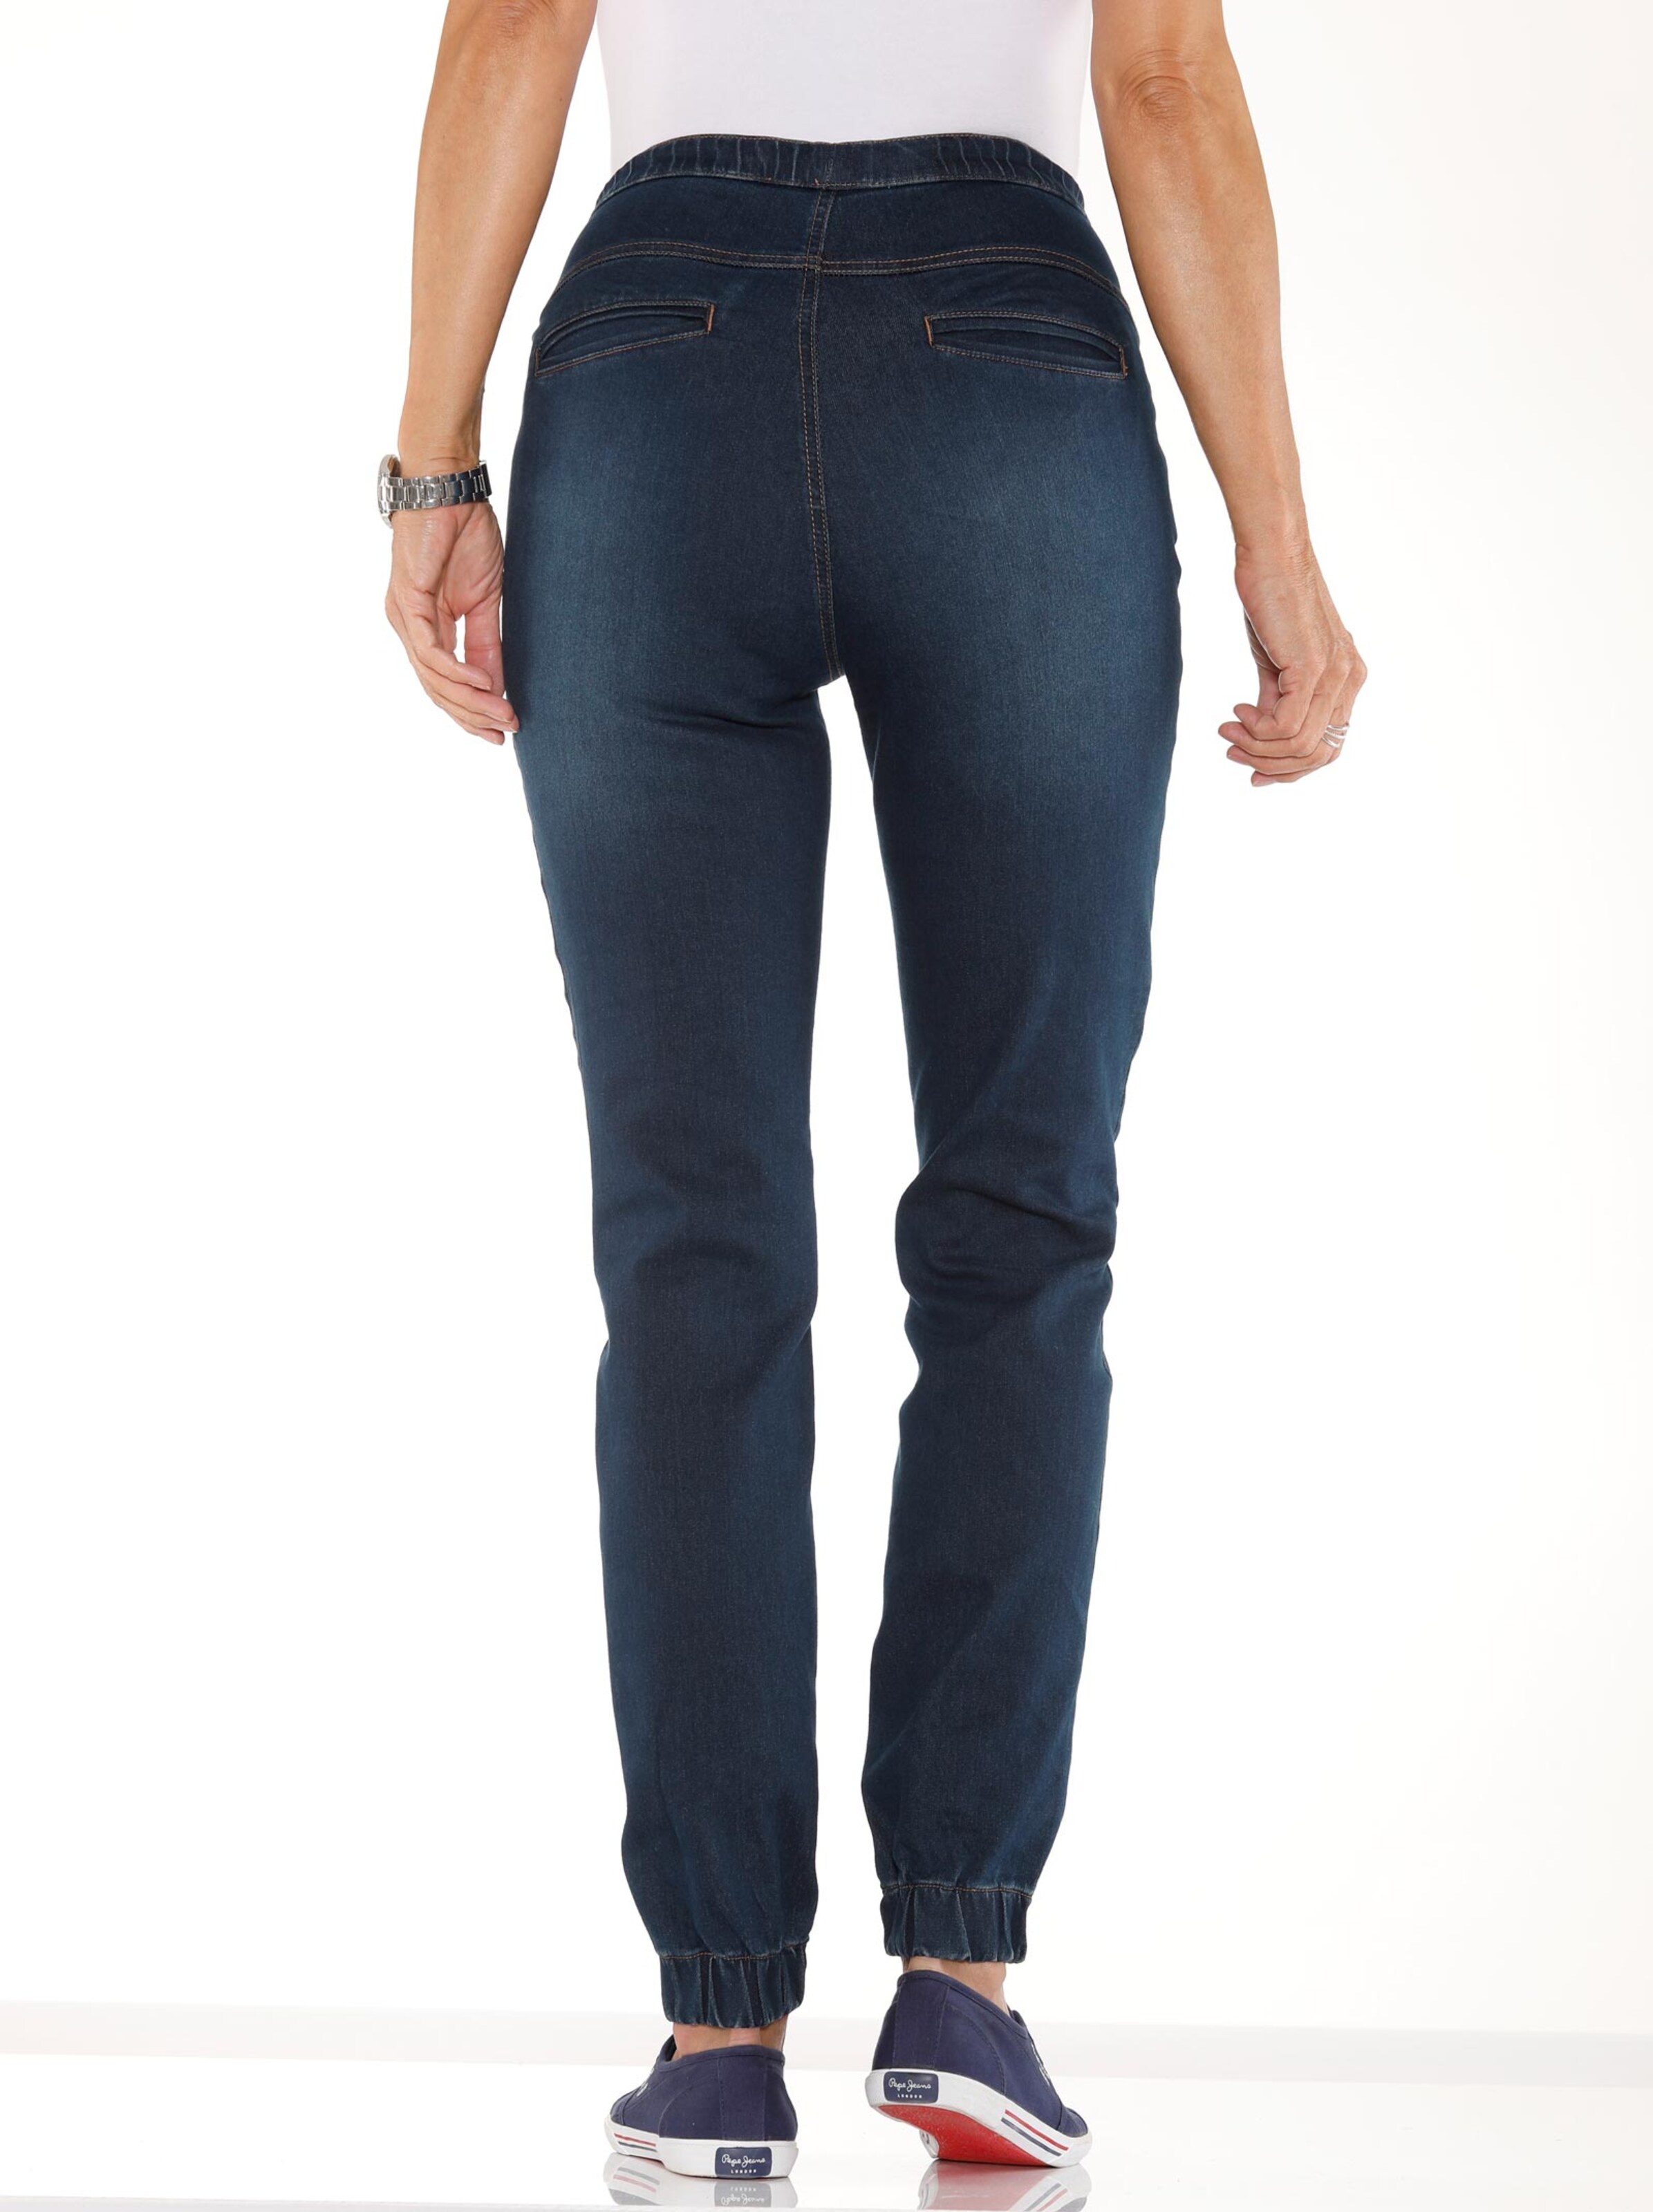 Damenmode Jeans Jeans in blue-stone-washed 